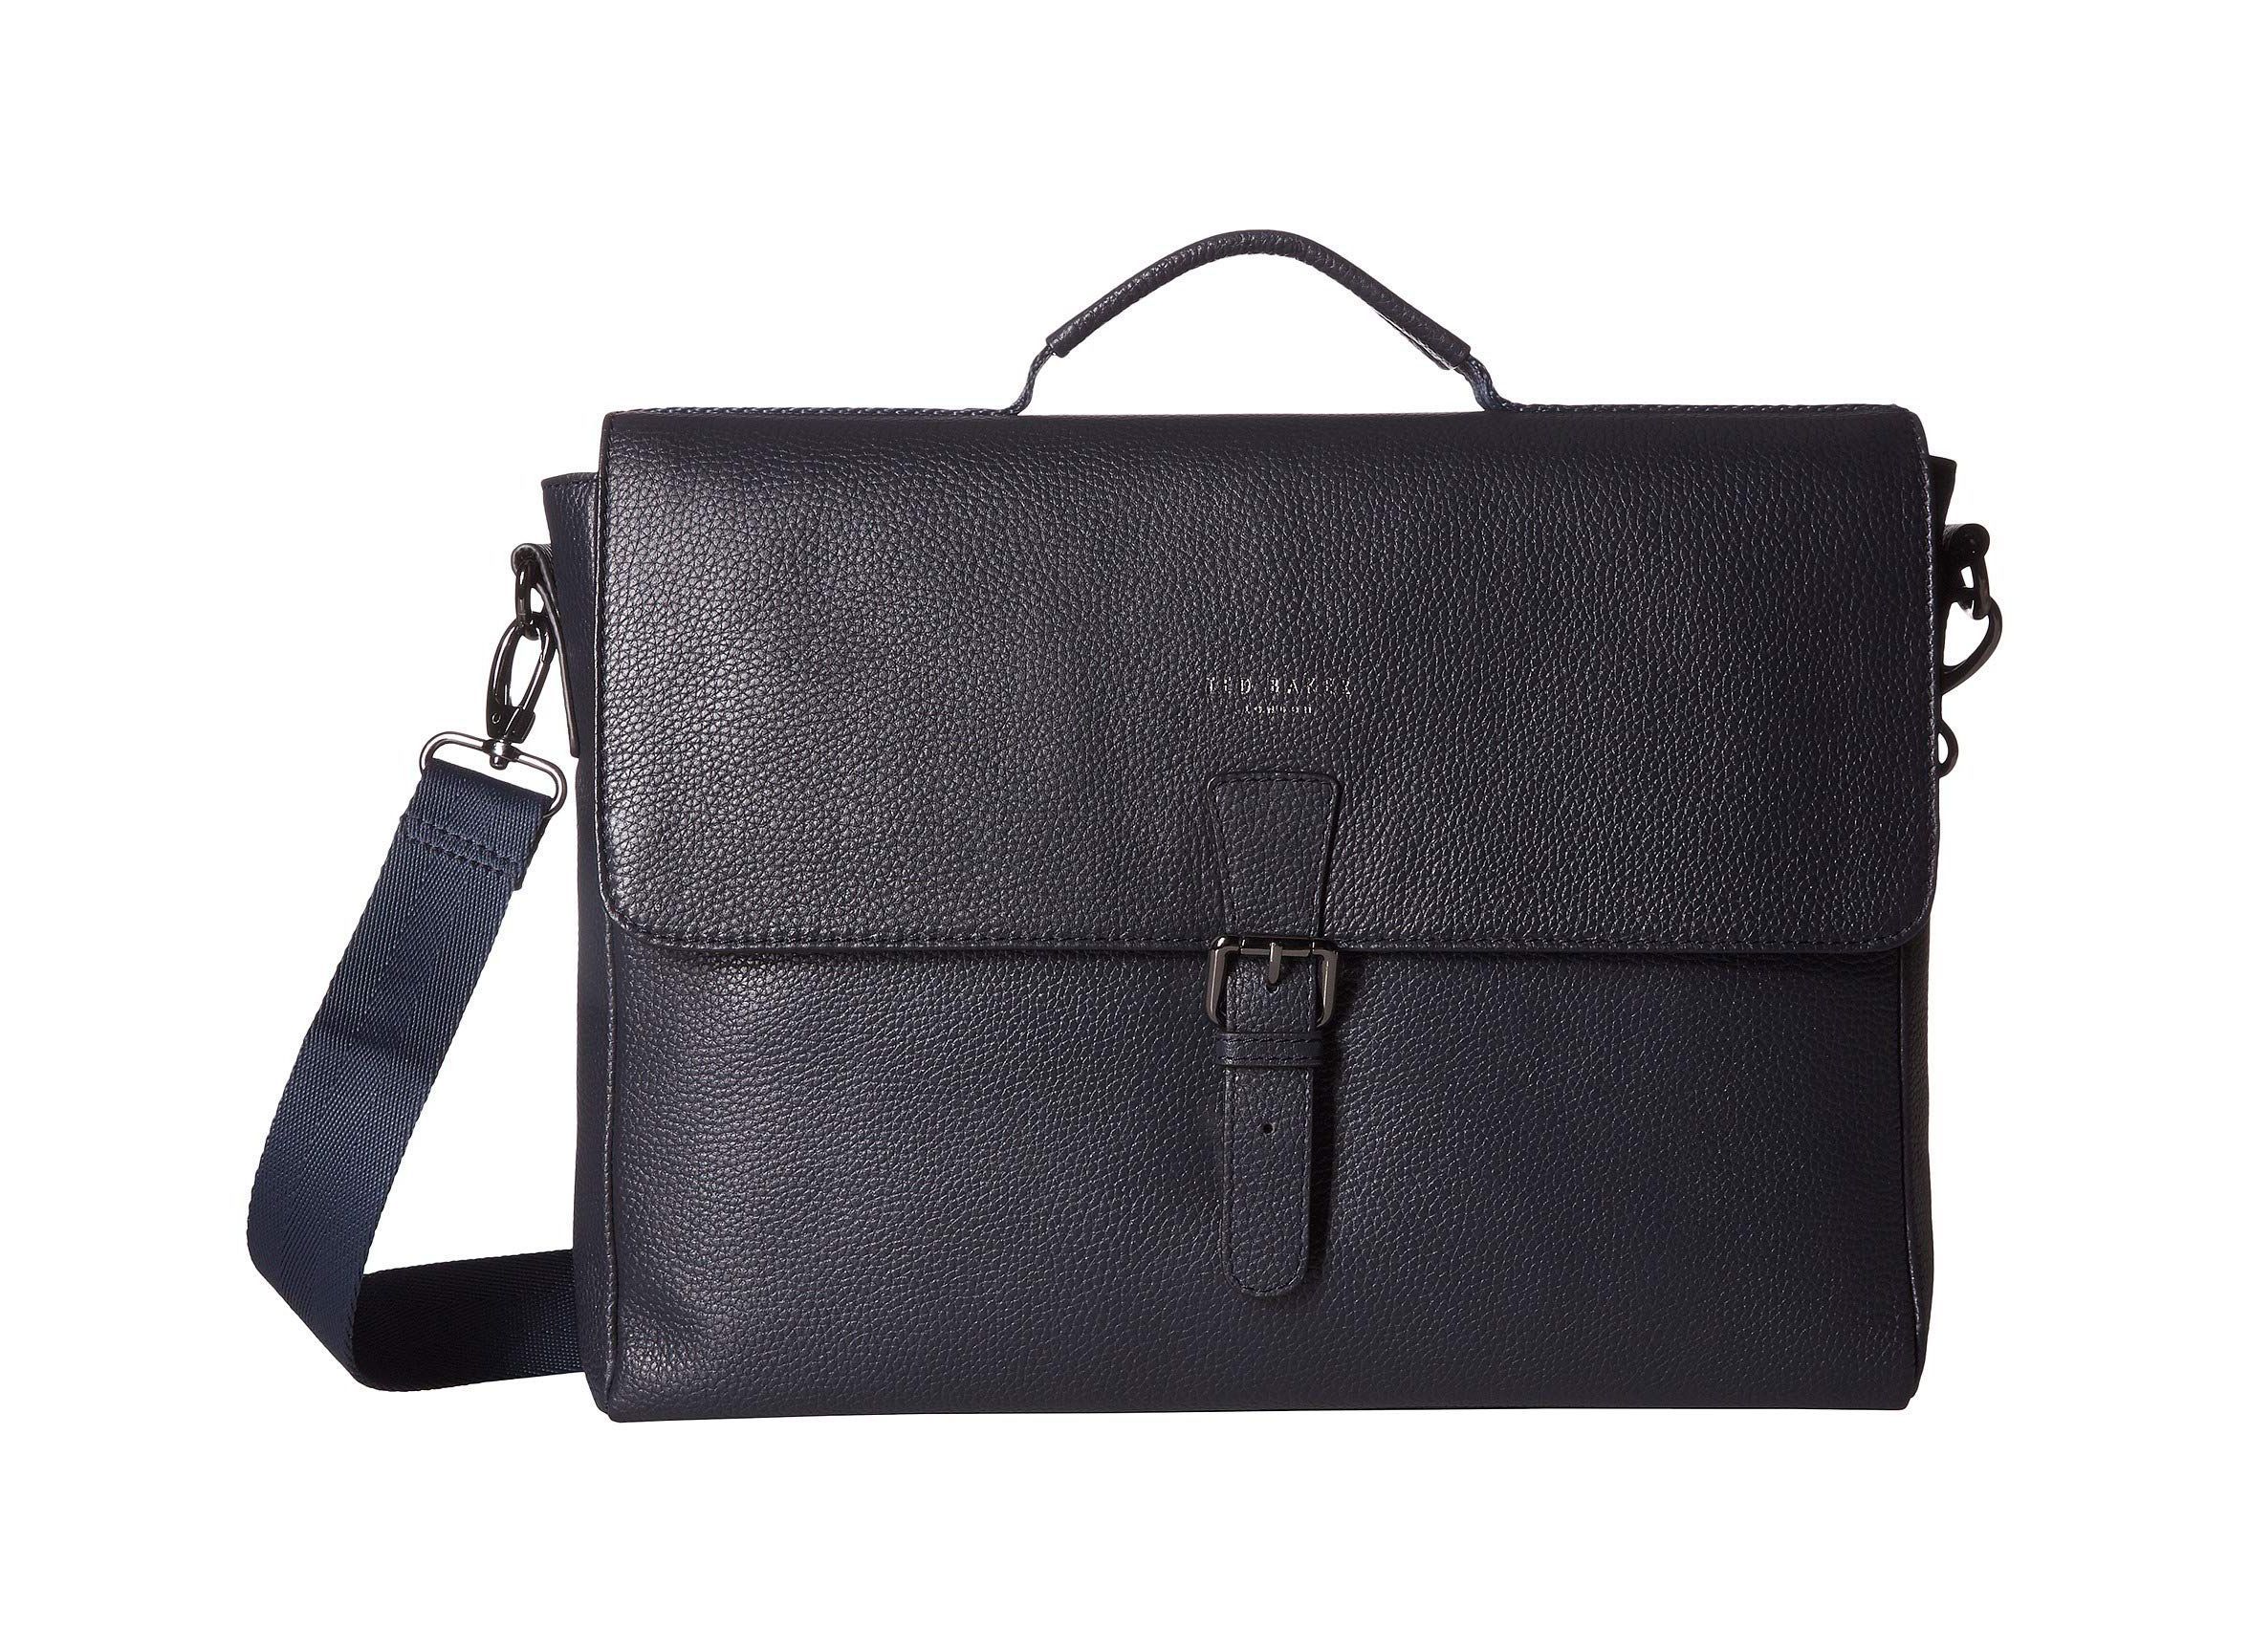 24 functional and stylish work bags for men | CNN Underscored